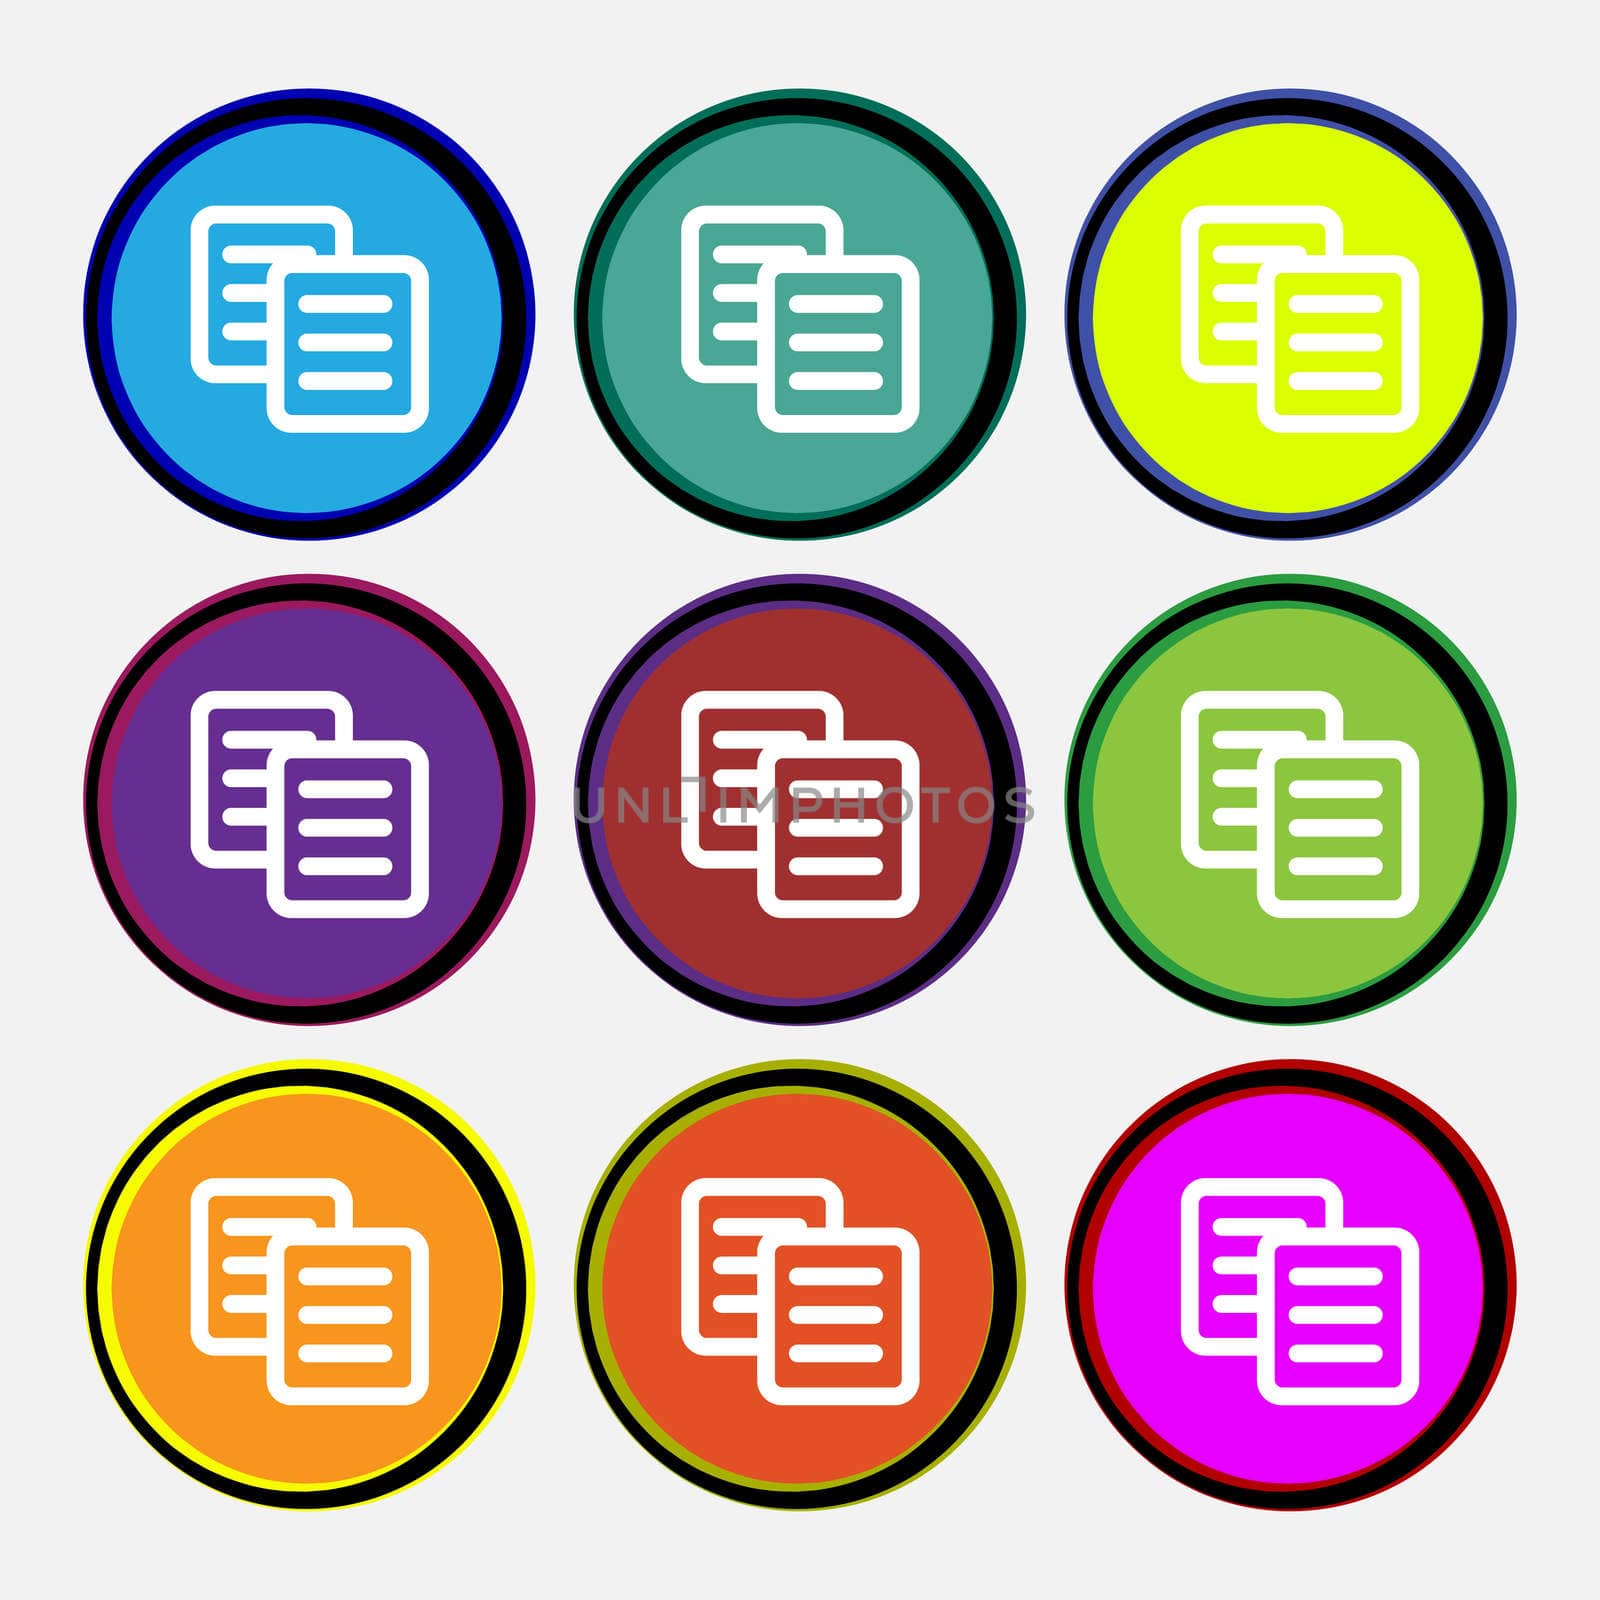 copy icon sign. Nine multi colored round buttons.  by serhii_lohvyniuk